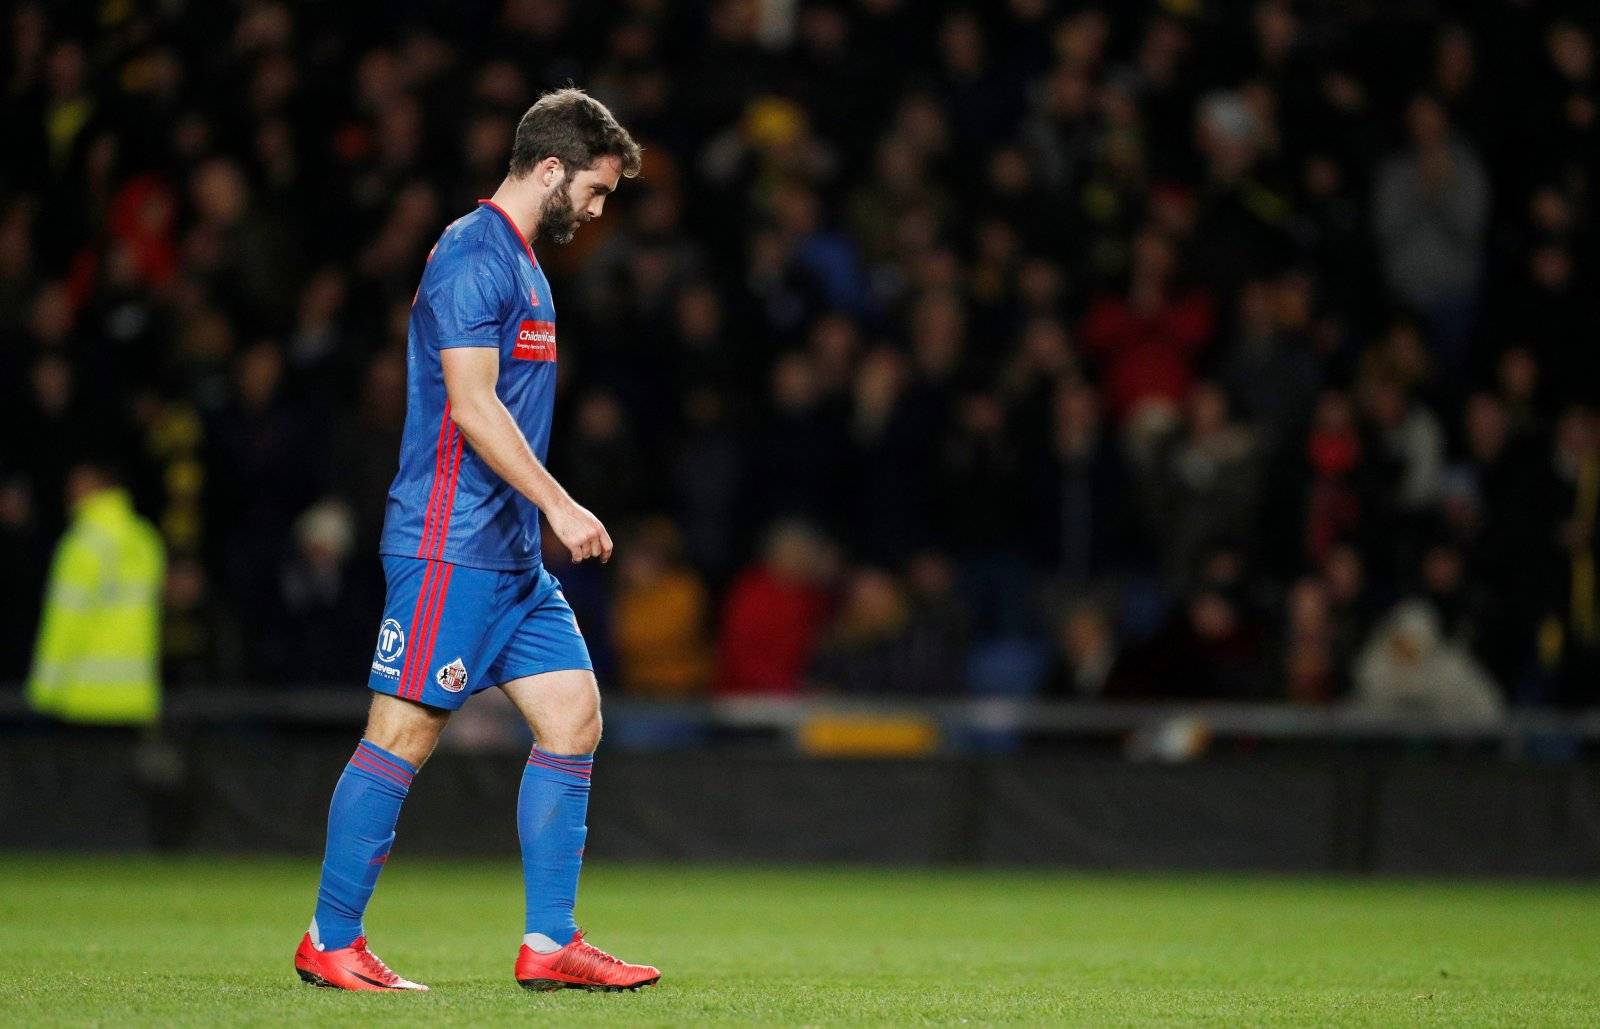 Sunderland: Football data consultant questions Will Grigg's future - League One News